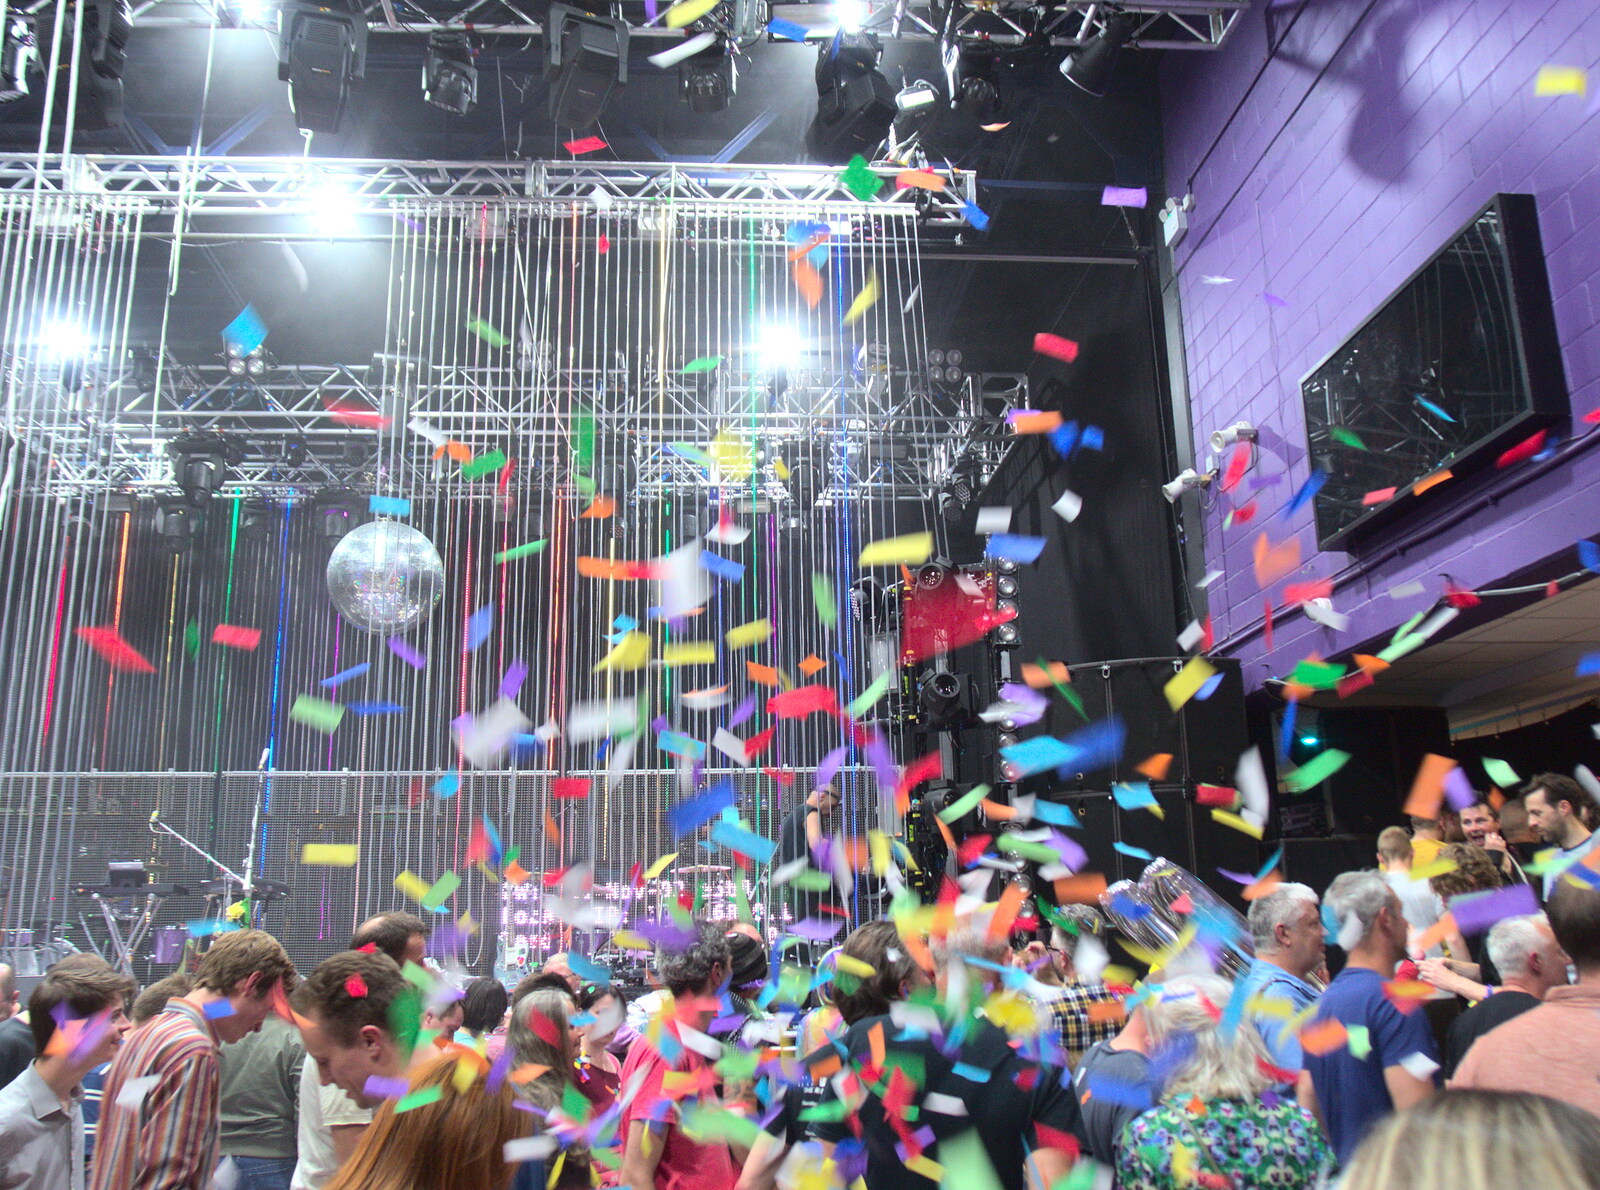 More confetti falls from the ceiling from Flaming Lips at the UEA, Norwich, Norfolk - 26th June 2017